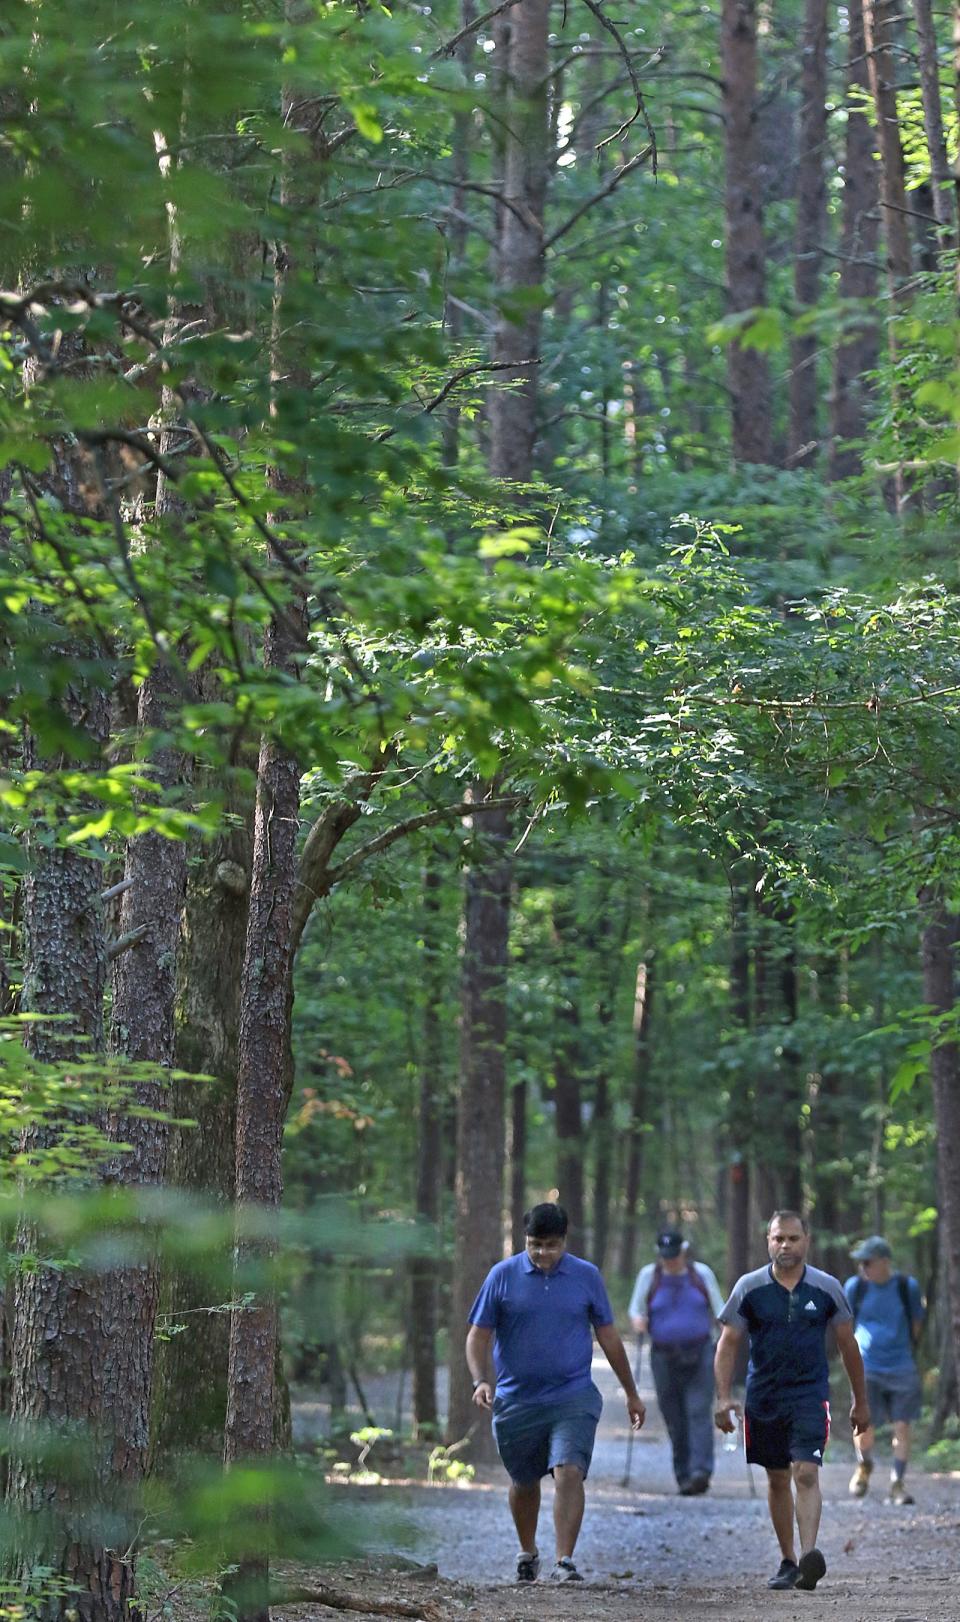 Kenan Patel and P.K.Patel hike the trail with others early Thursday morning, June 16, 2022, at Crowders Mountain State Park.